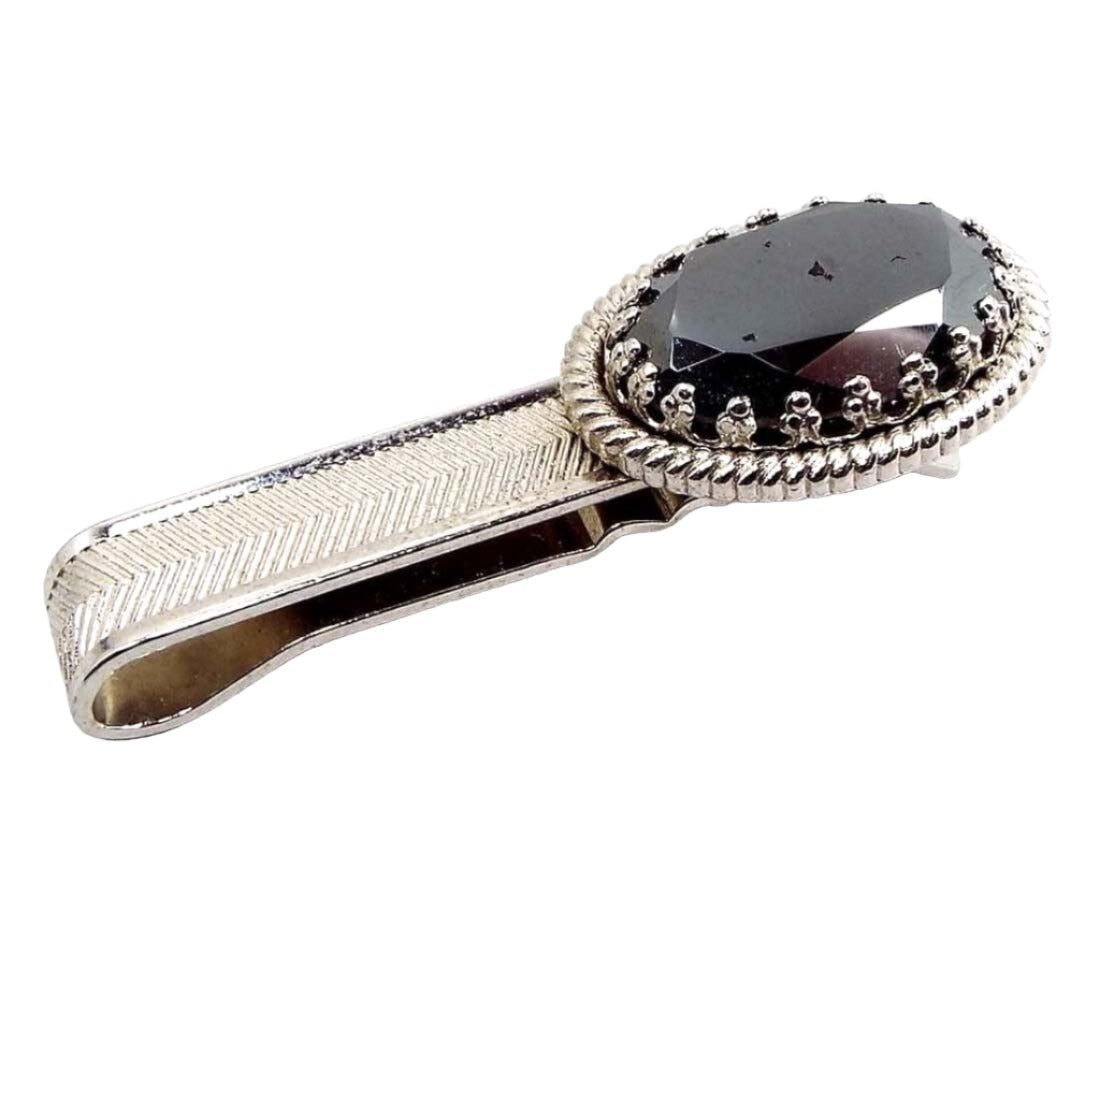 Angled front view of the Mid Century vintage faux hematite tie bar. The metal is silver tone in color. It is a slide on style tie bar with a large faceted oval glass imitation hematite cab at the end.